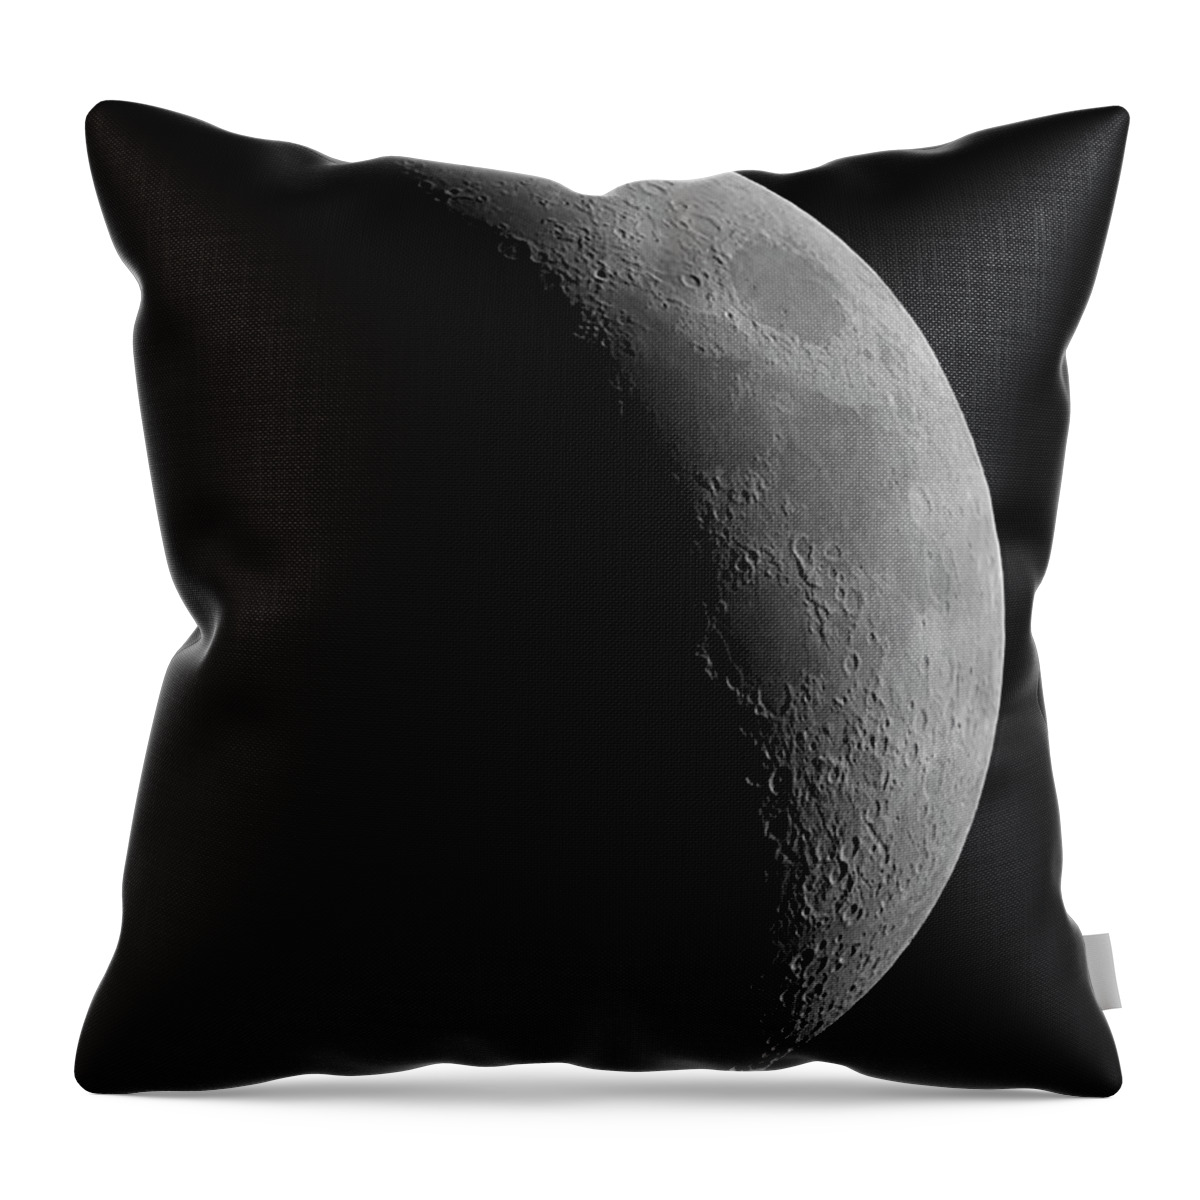 Black Color Throw Pillow featuring the photograph Earths Moon by Lwa